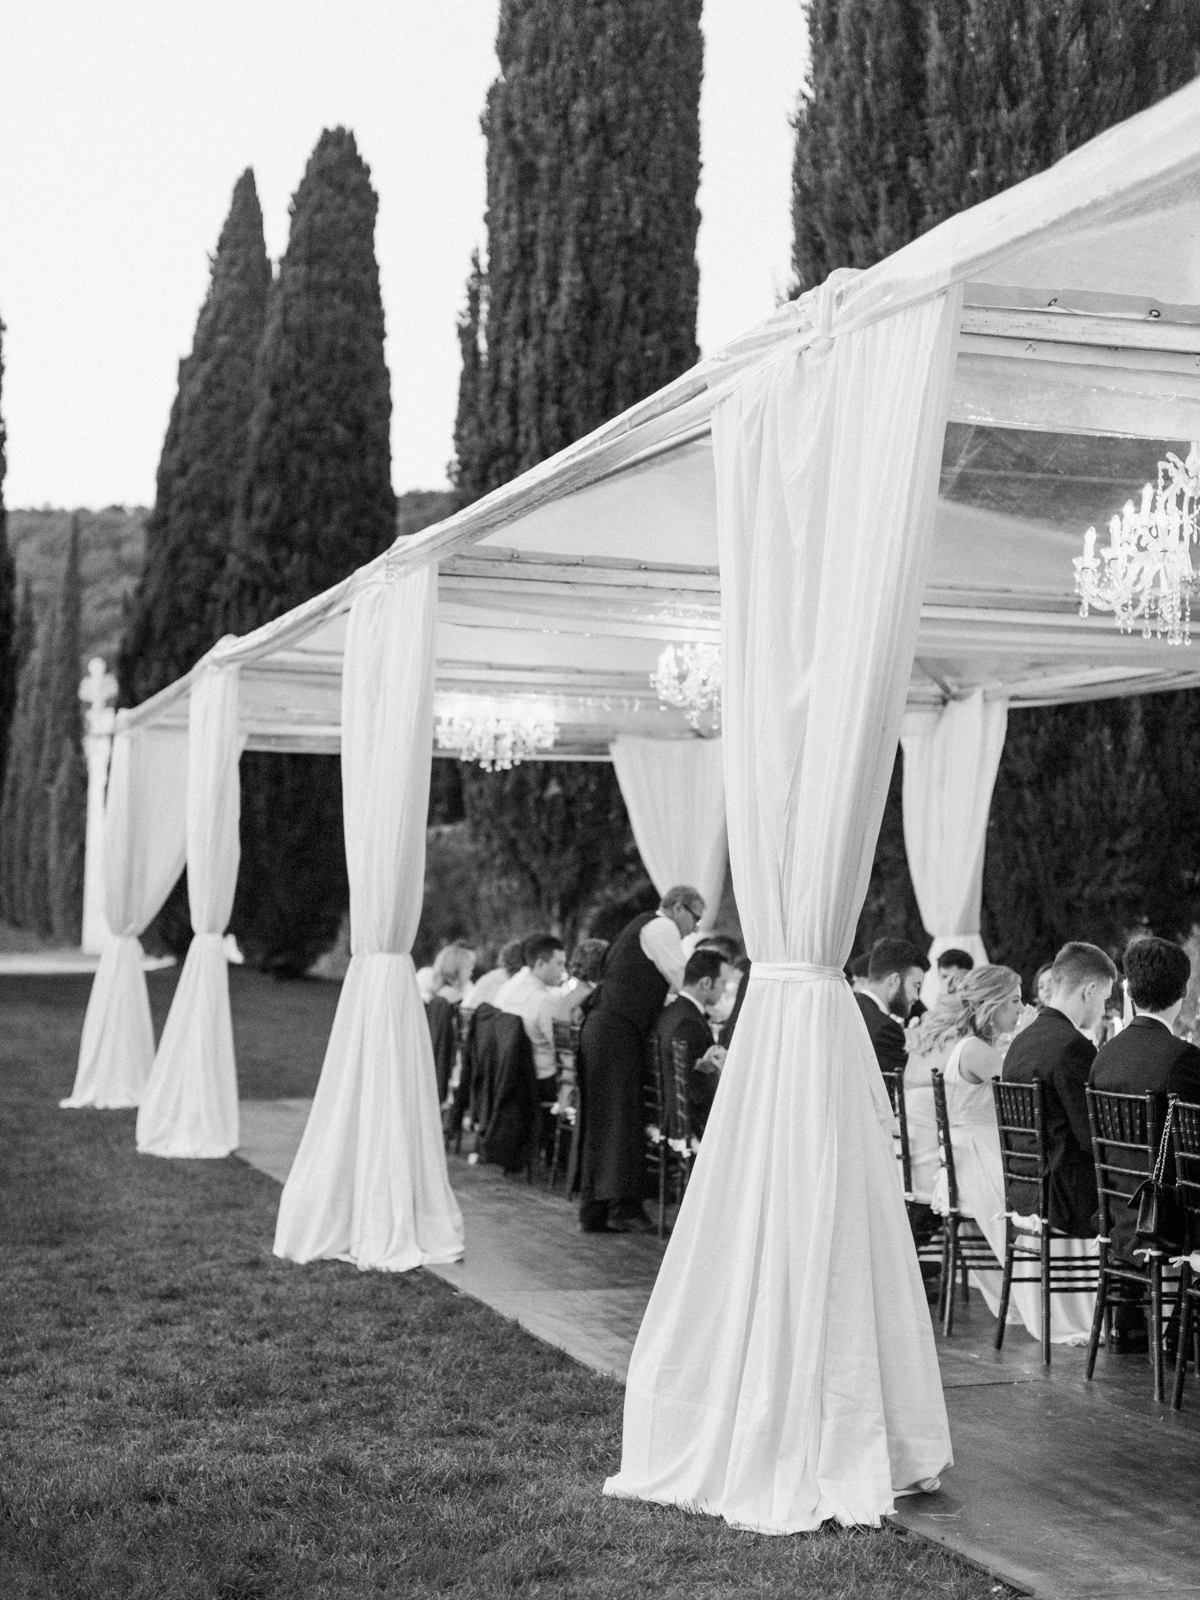 Villa Cetinale Wedding Photographer | Siena Wedding Venue | Tuscany Film Photographer | Italy Destination Wedding | Molly Carr Photography | White Wedding Reception Clear Tent Chandeliers